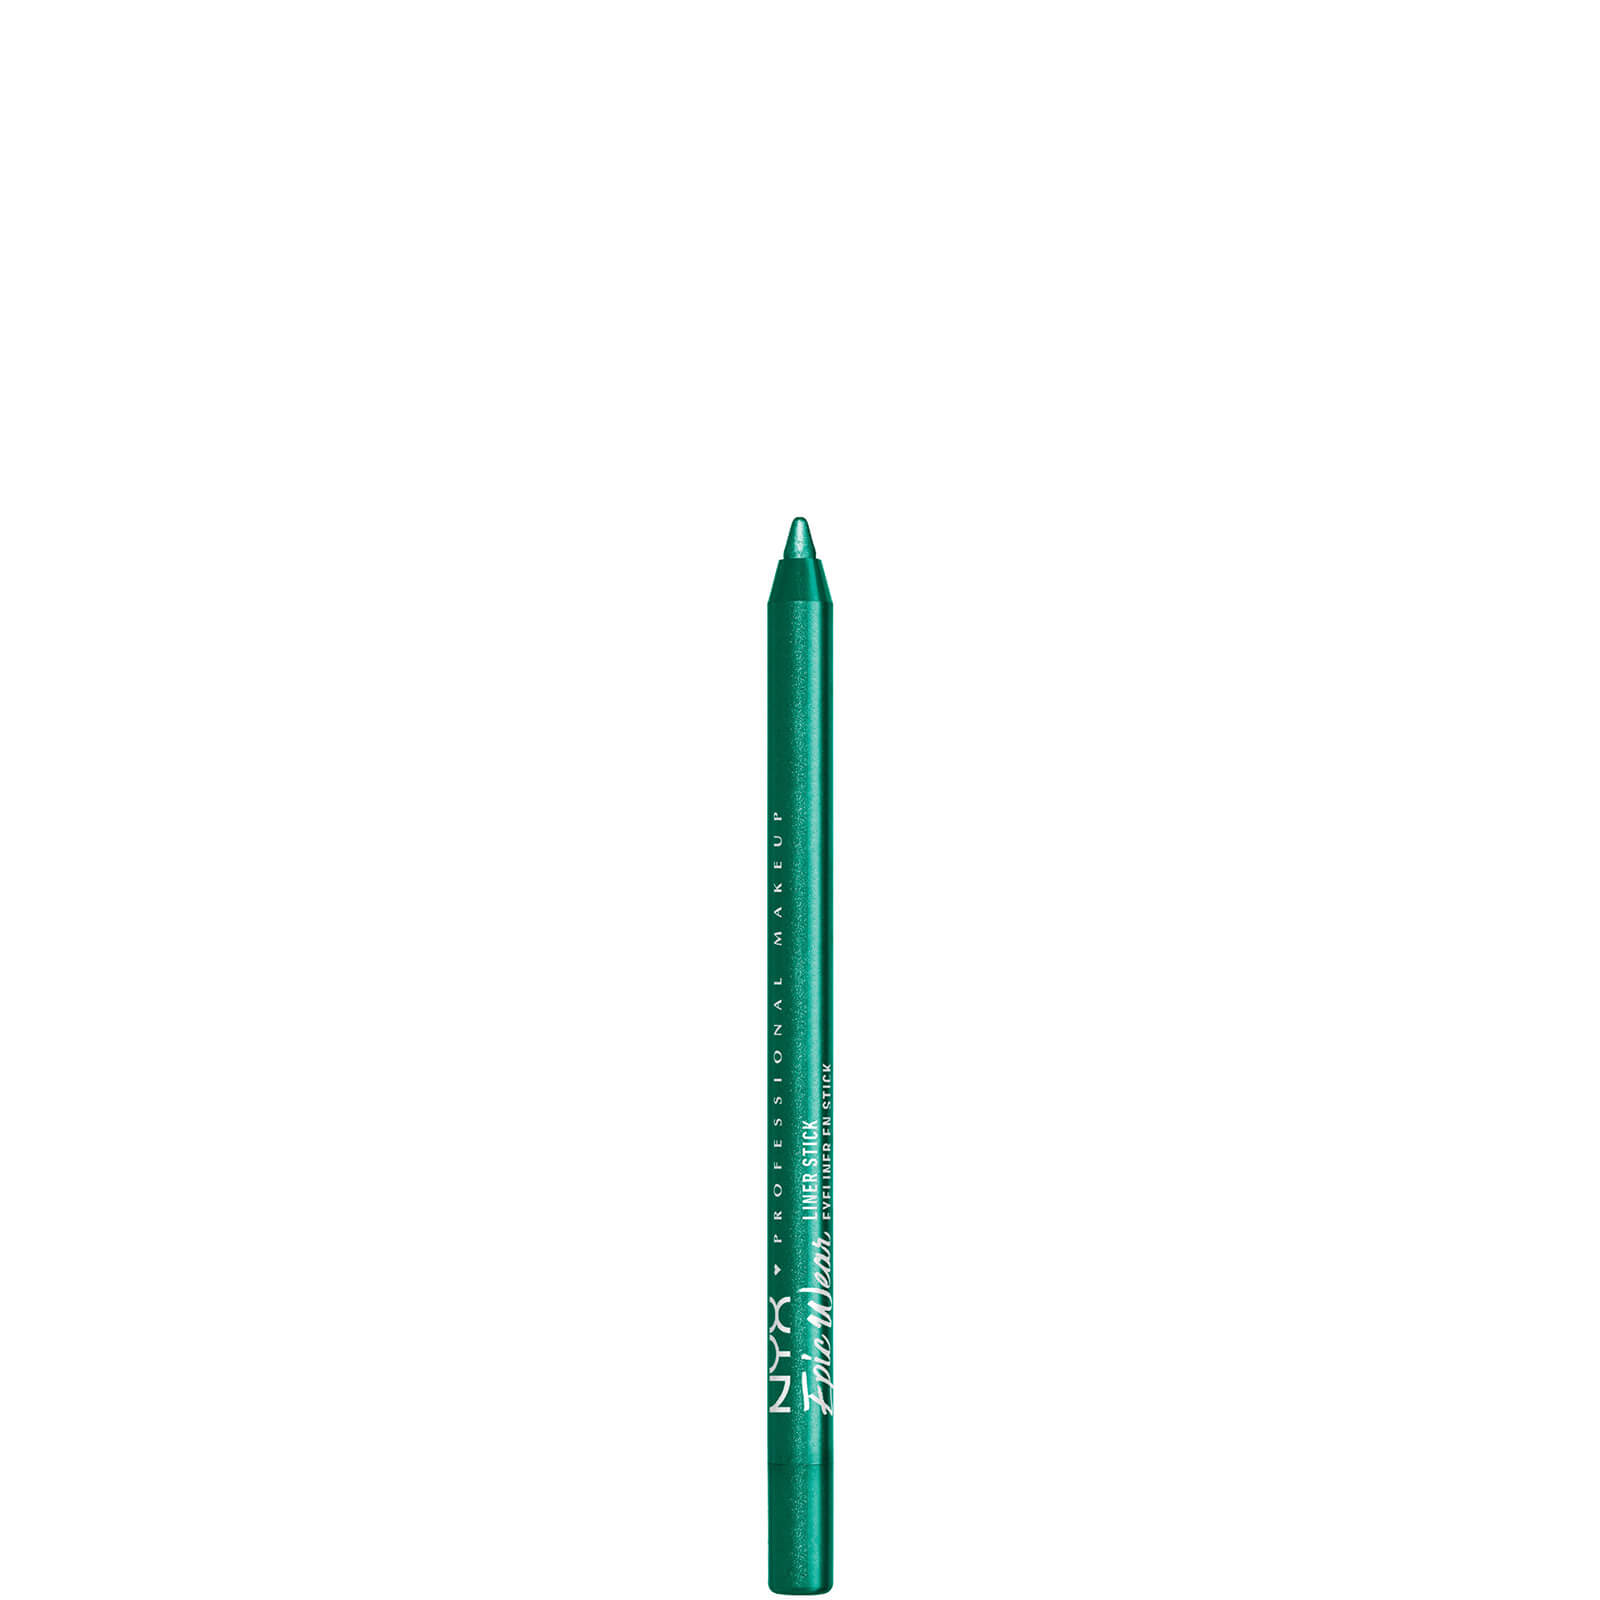 Image of NYX Professional Makeup Epic Wear Long Lasting Liner Stick 1.22g (Various Shades) - Intense Teal